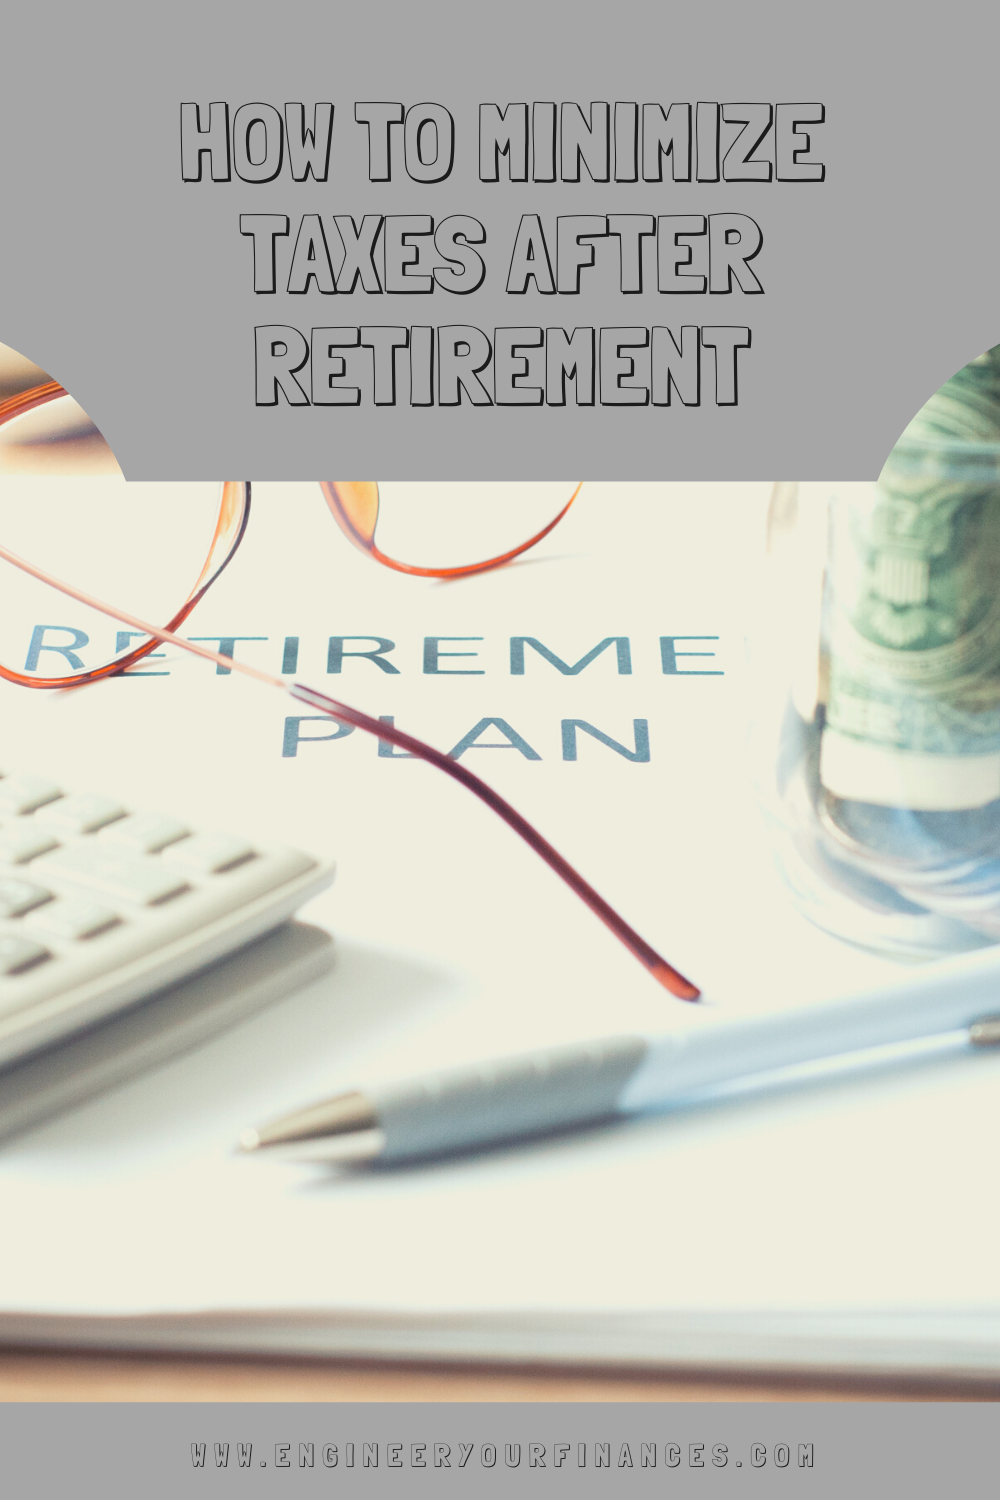 How to Minimize Taxes After Retirement